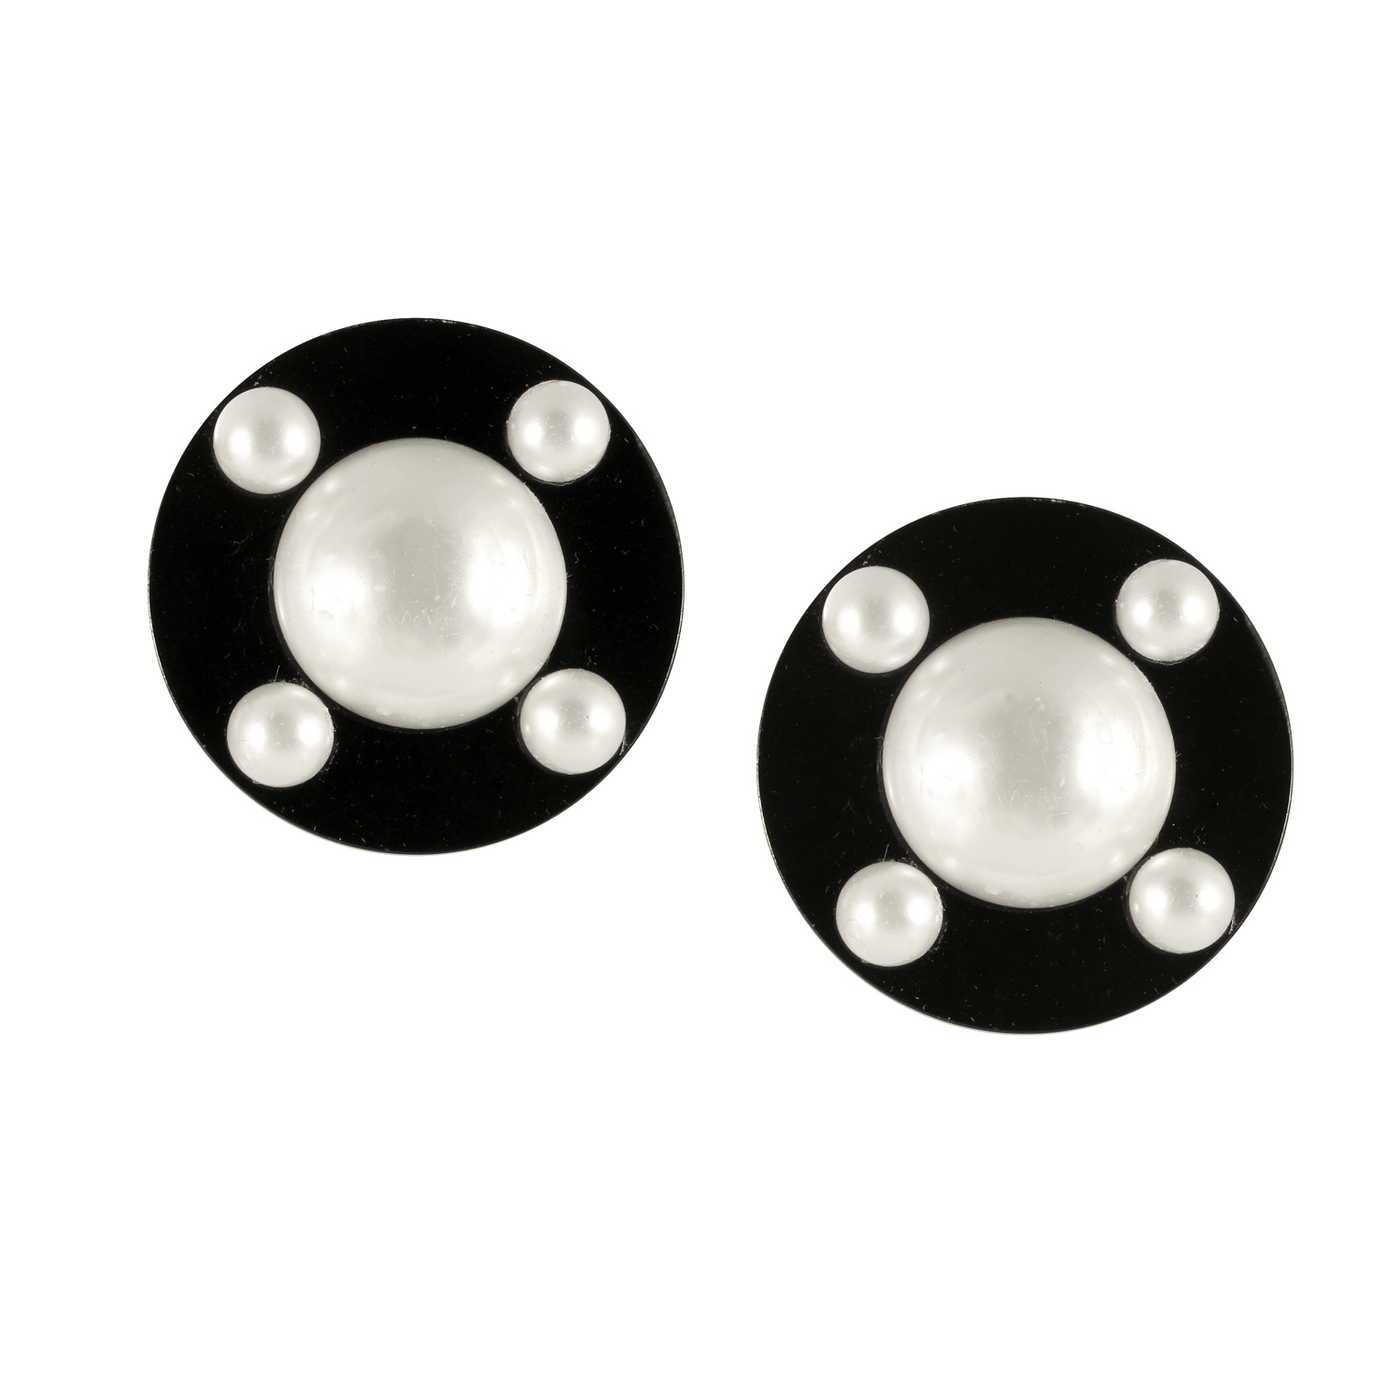 Chanel Black Resin and Pearl Earrings - Only Authentics